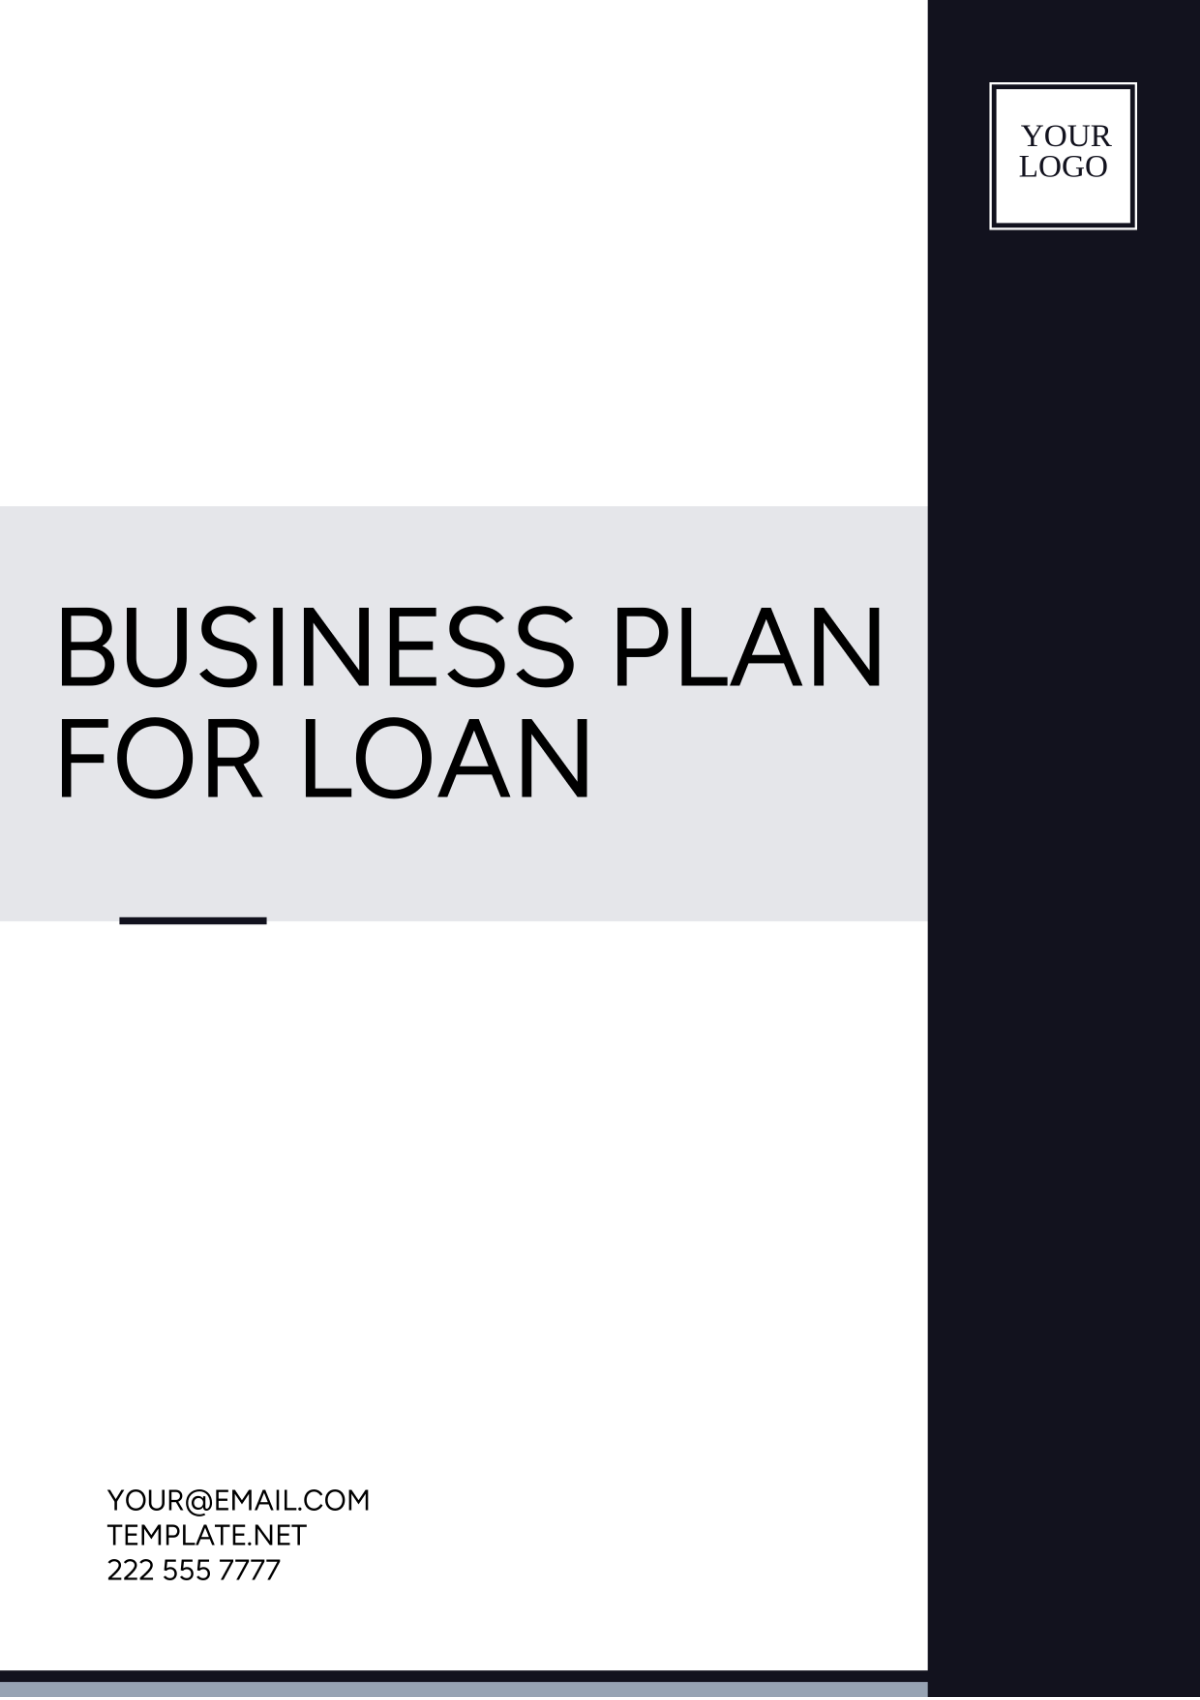 Free Business Plan for Loan Template